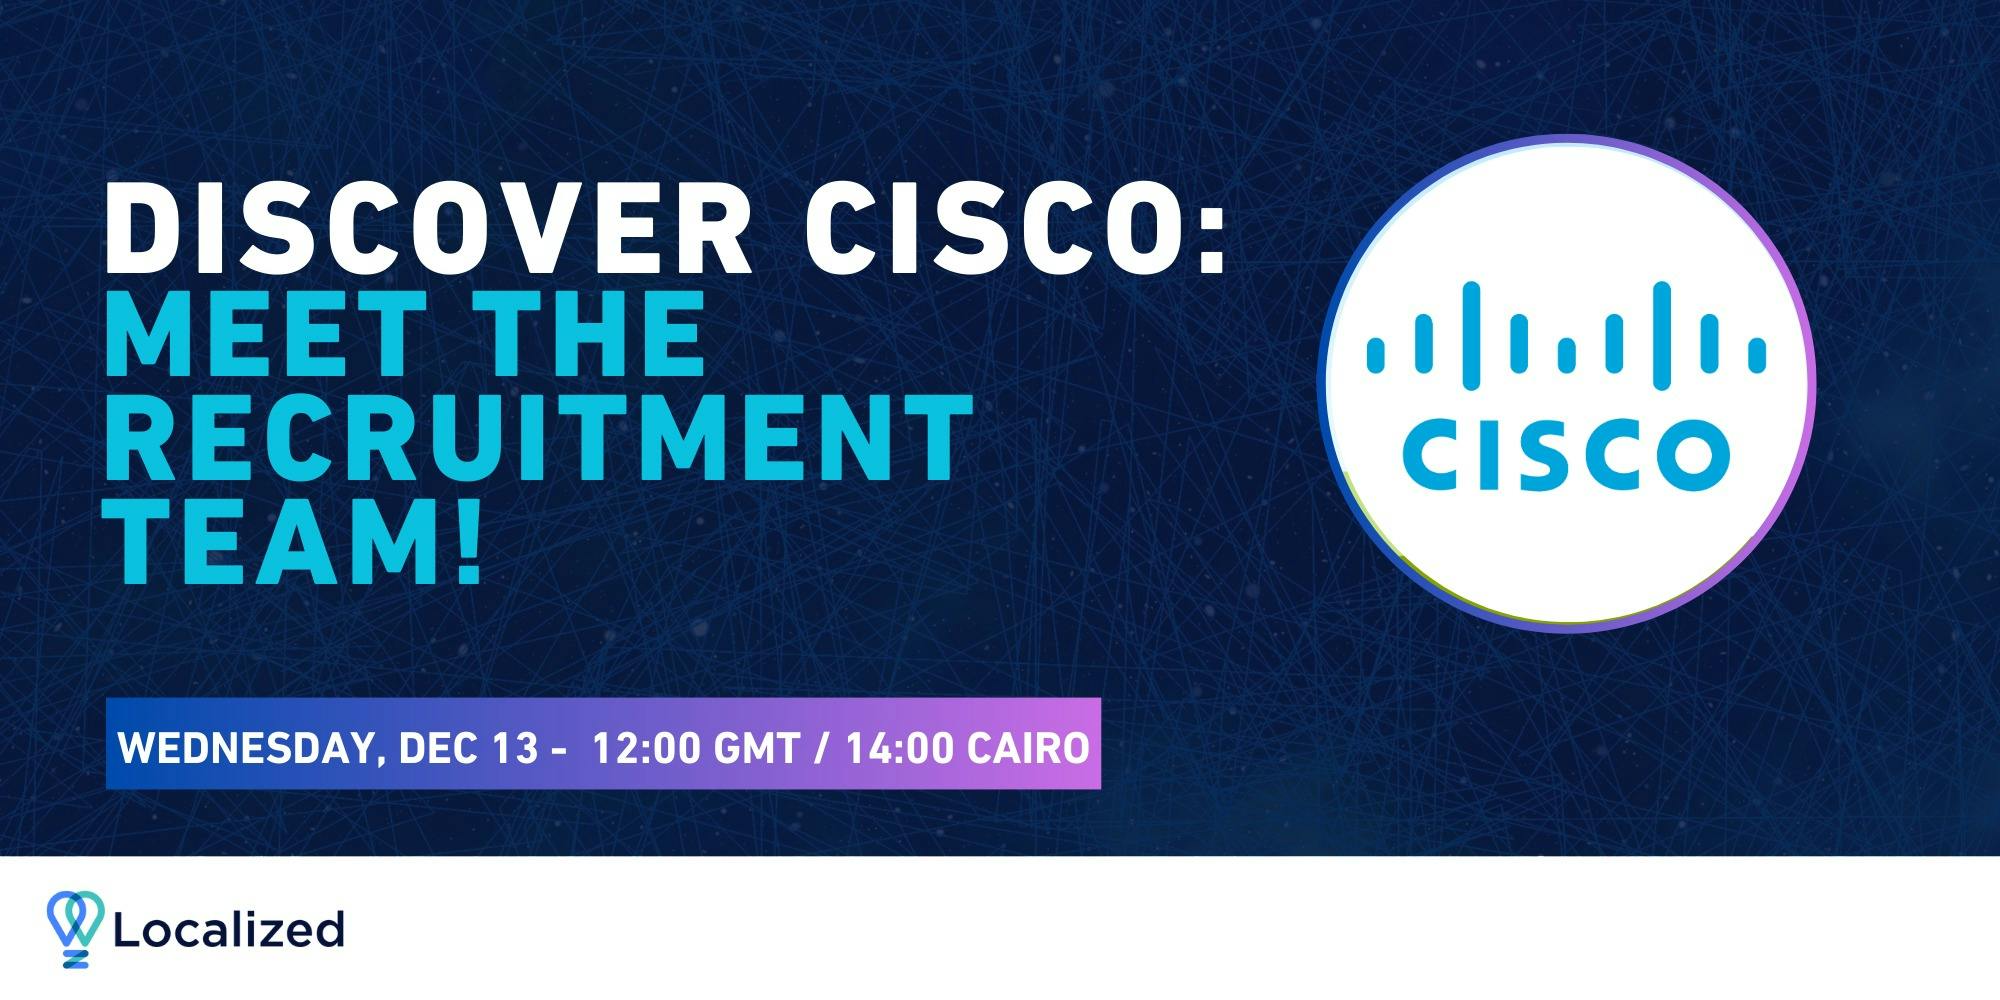 Discover Cisco EMEA: How to Stand Out from the Crowd! (registration link below)